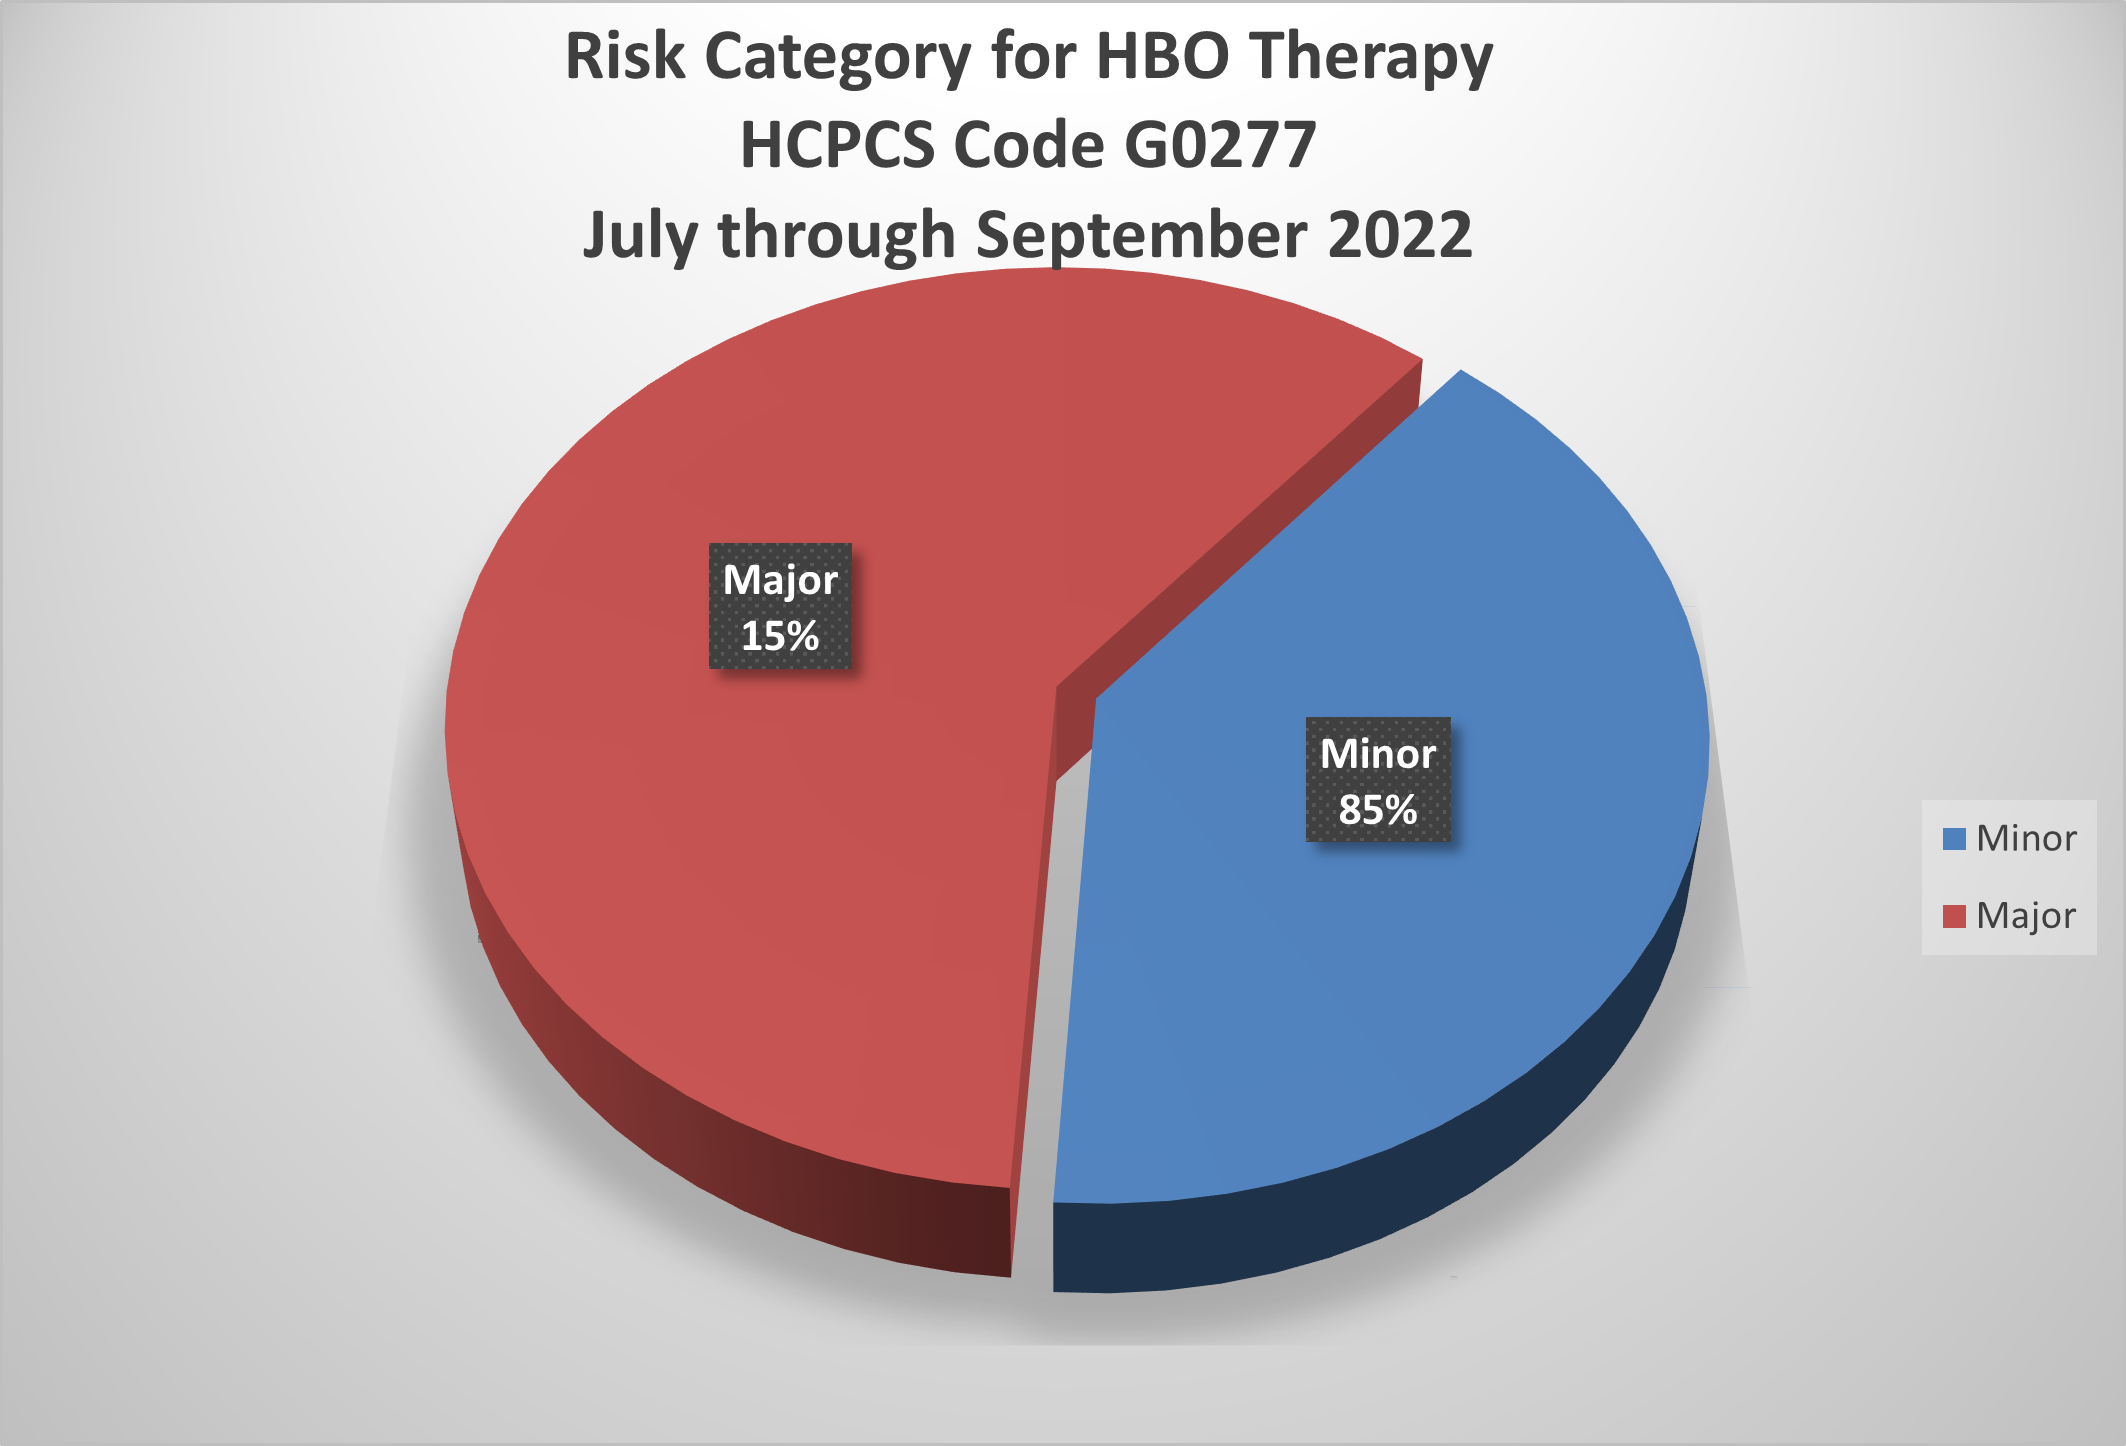 Risk Category for HBO Therapy